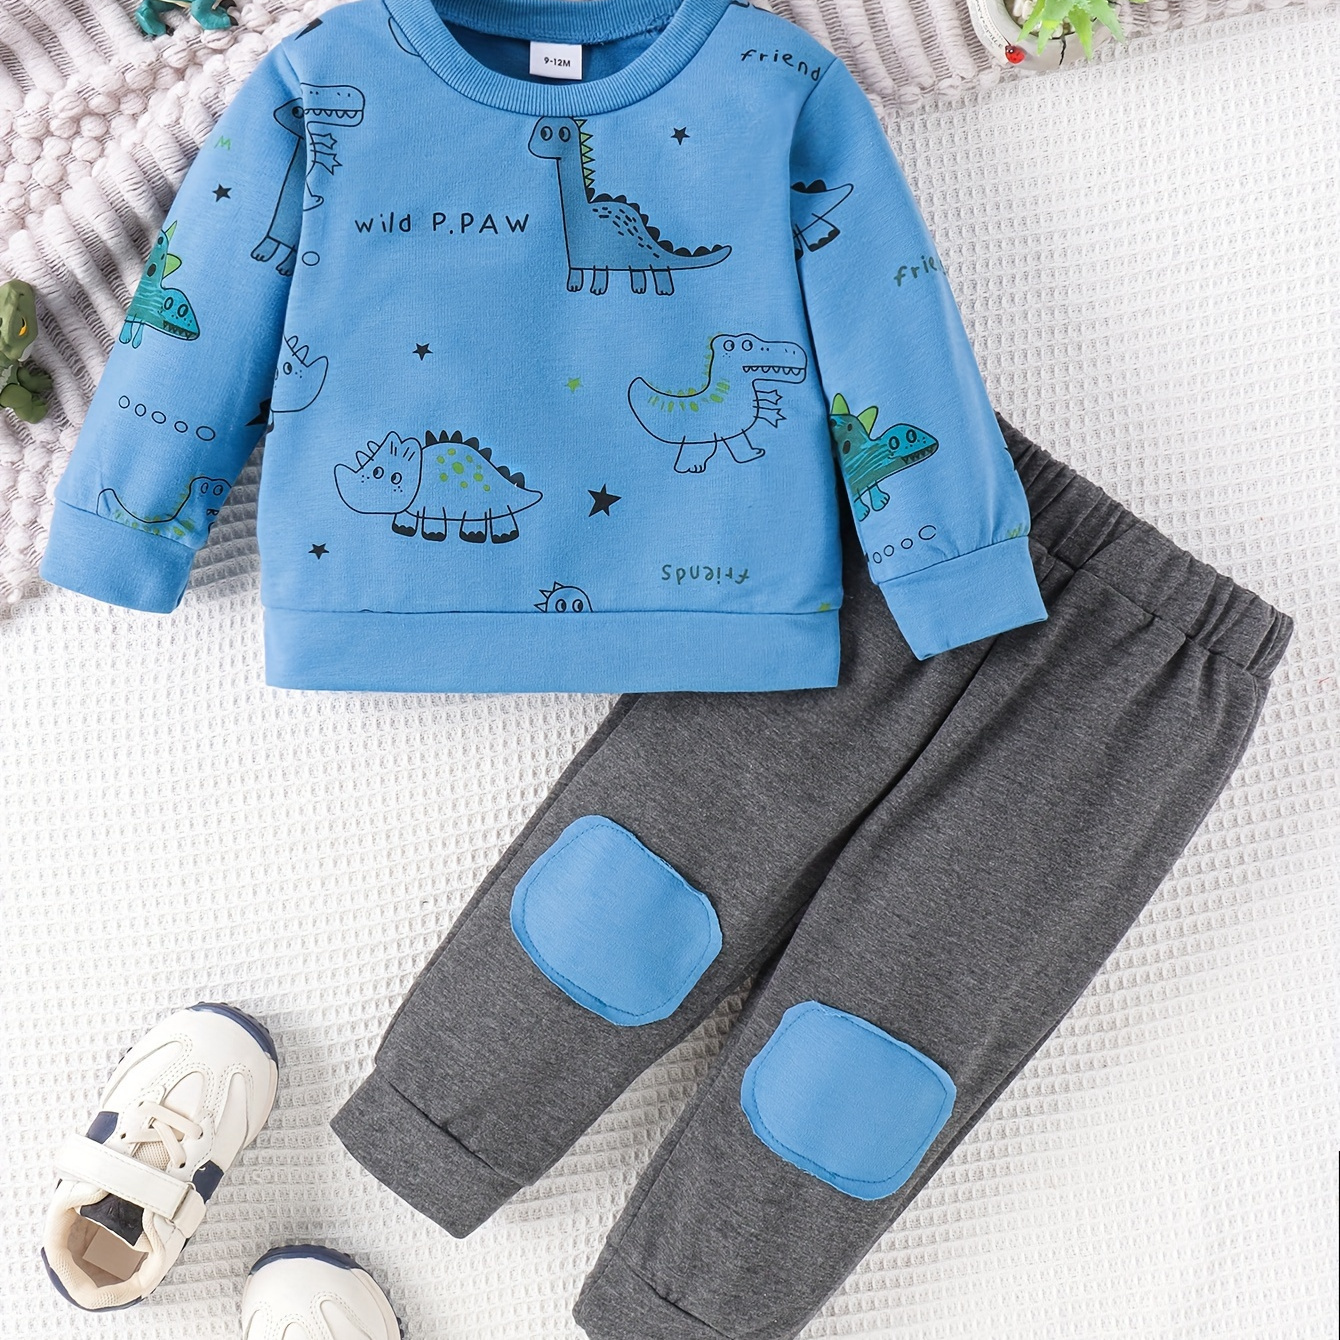 

2pcs Boy's Color Clash Outfit, Dinosaur Pattern Sweatshirt & Patched Sweatpants Set, Casual Long Sleeve Top, Kid's Clothes For Spring Fall Winter, As Gift